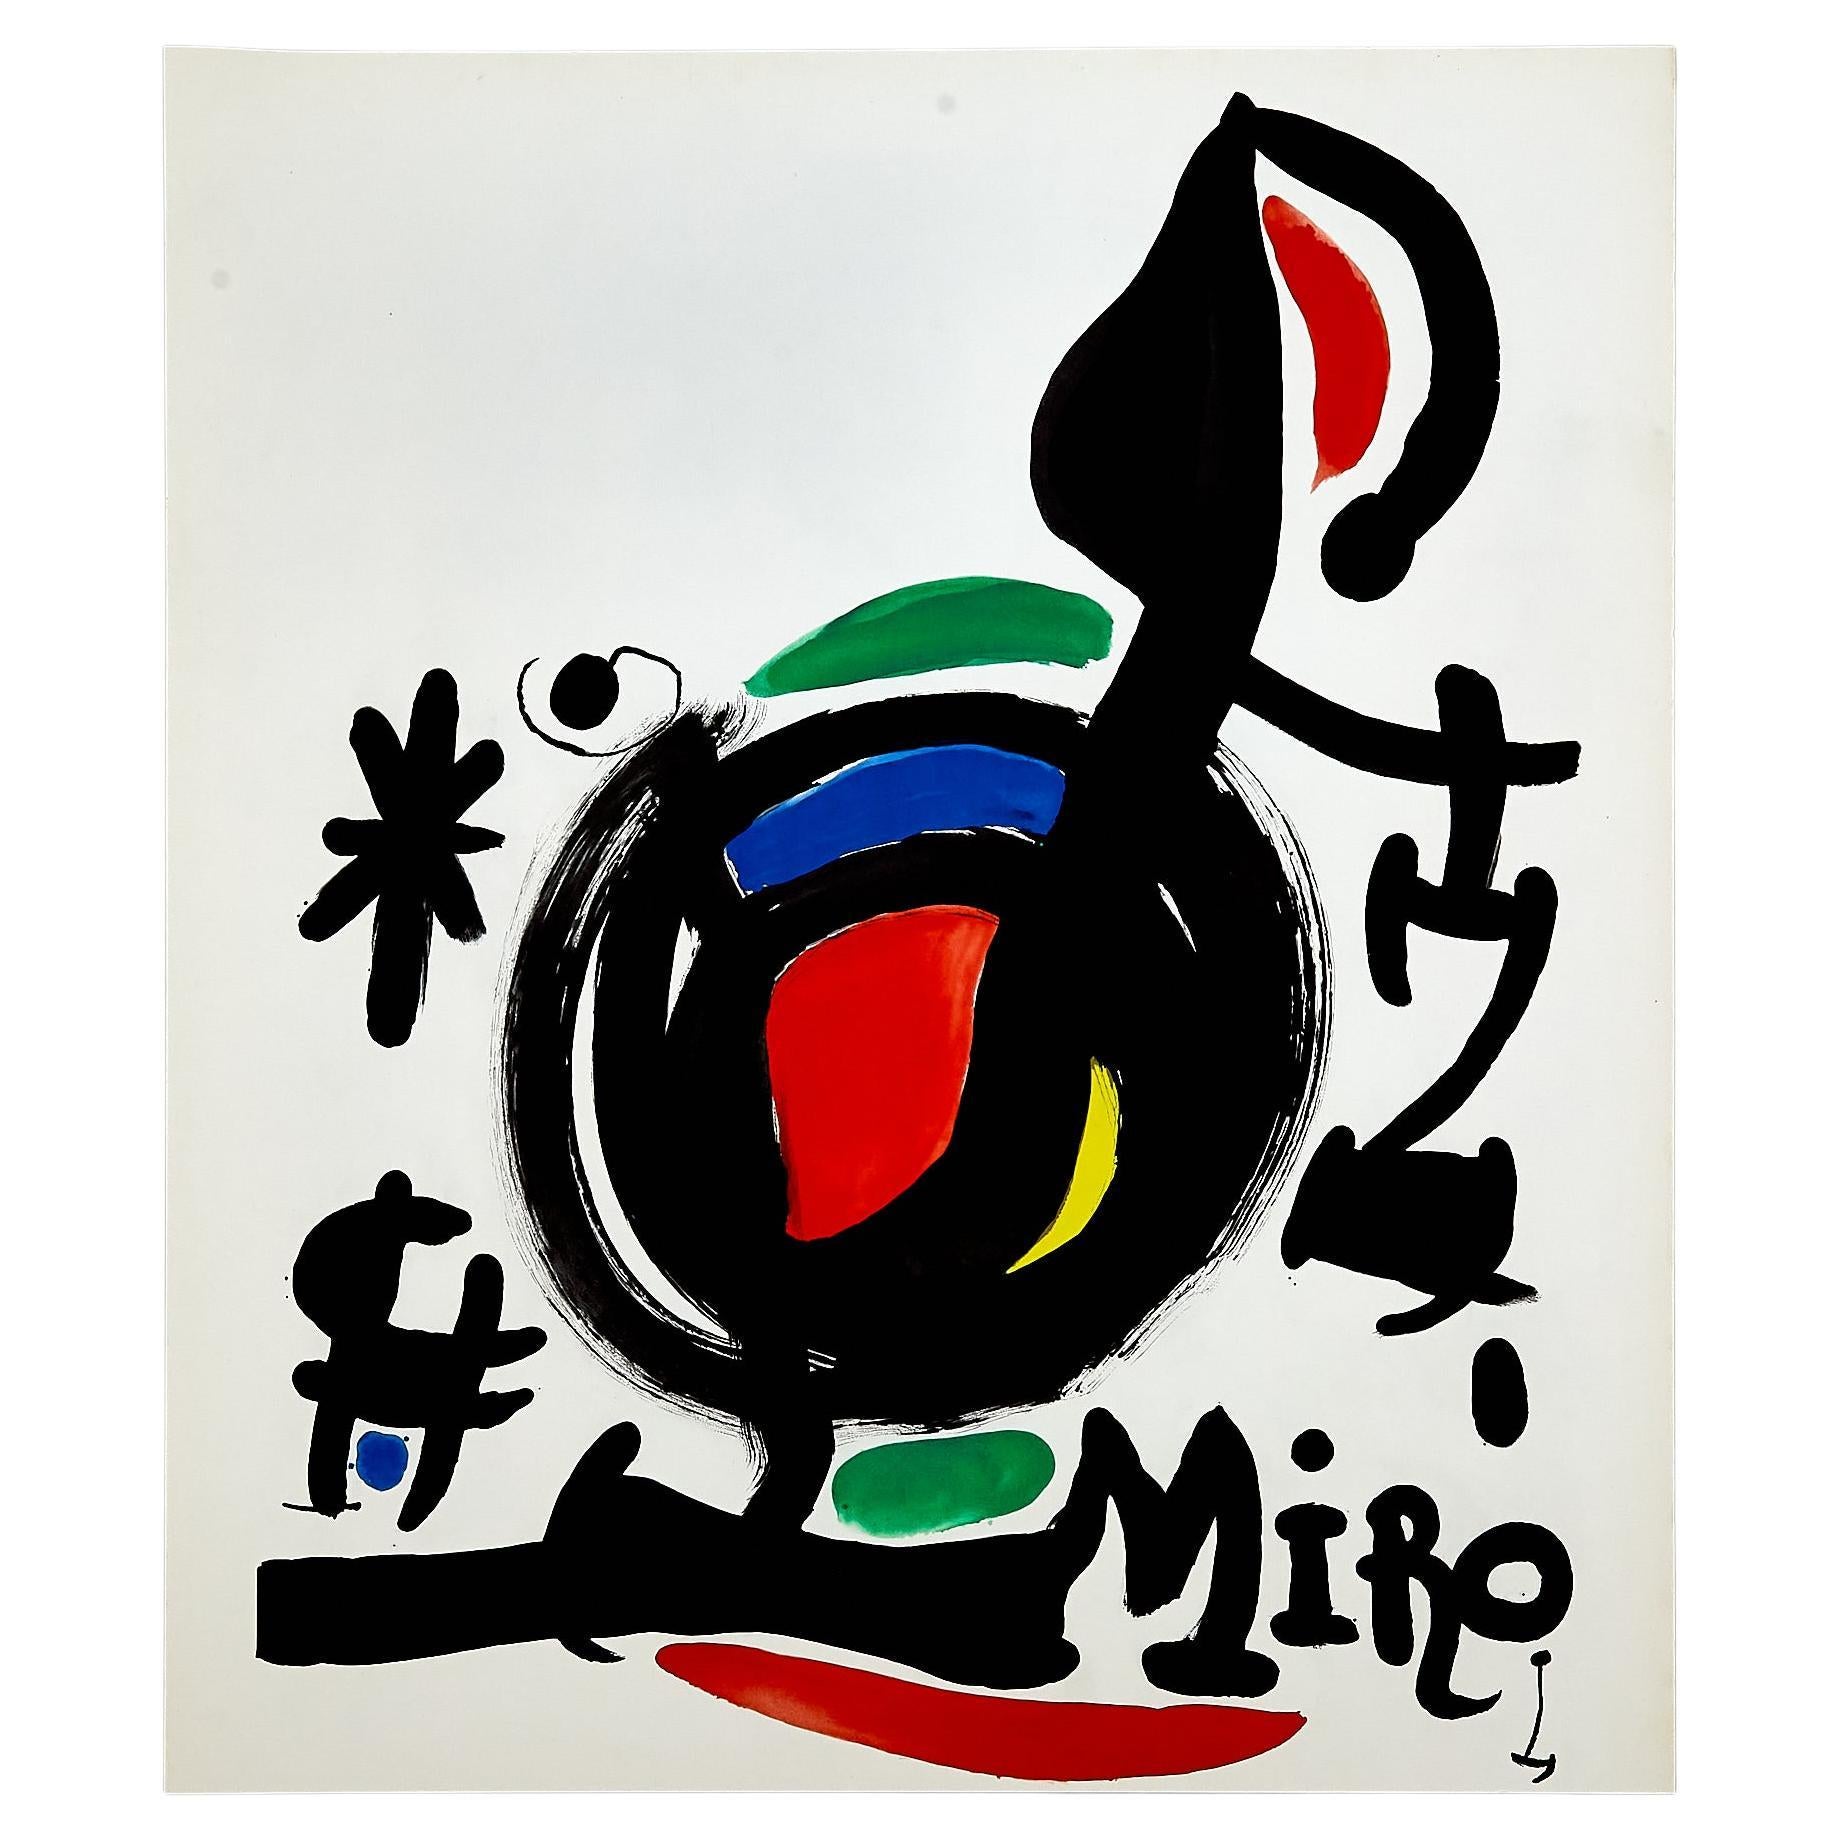  High Quality Fine Art Color Lithography by Joan Miró, circa 1960. For Sale